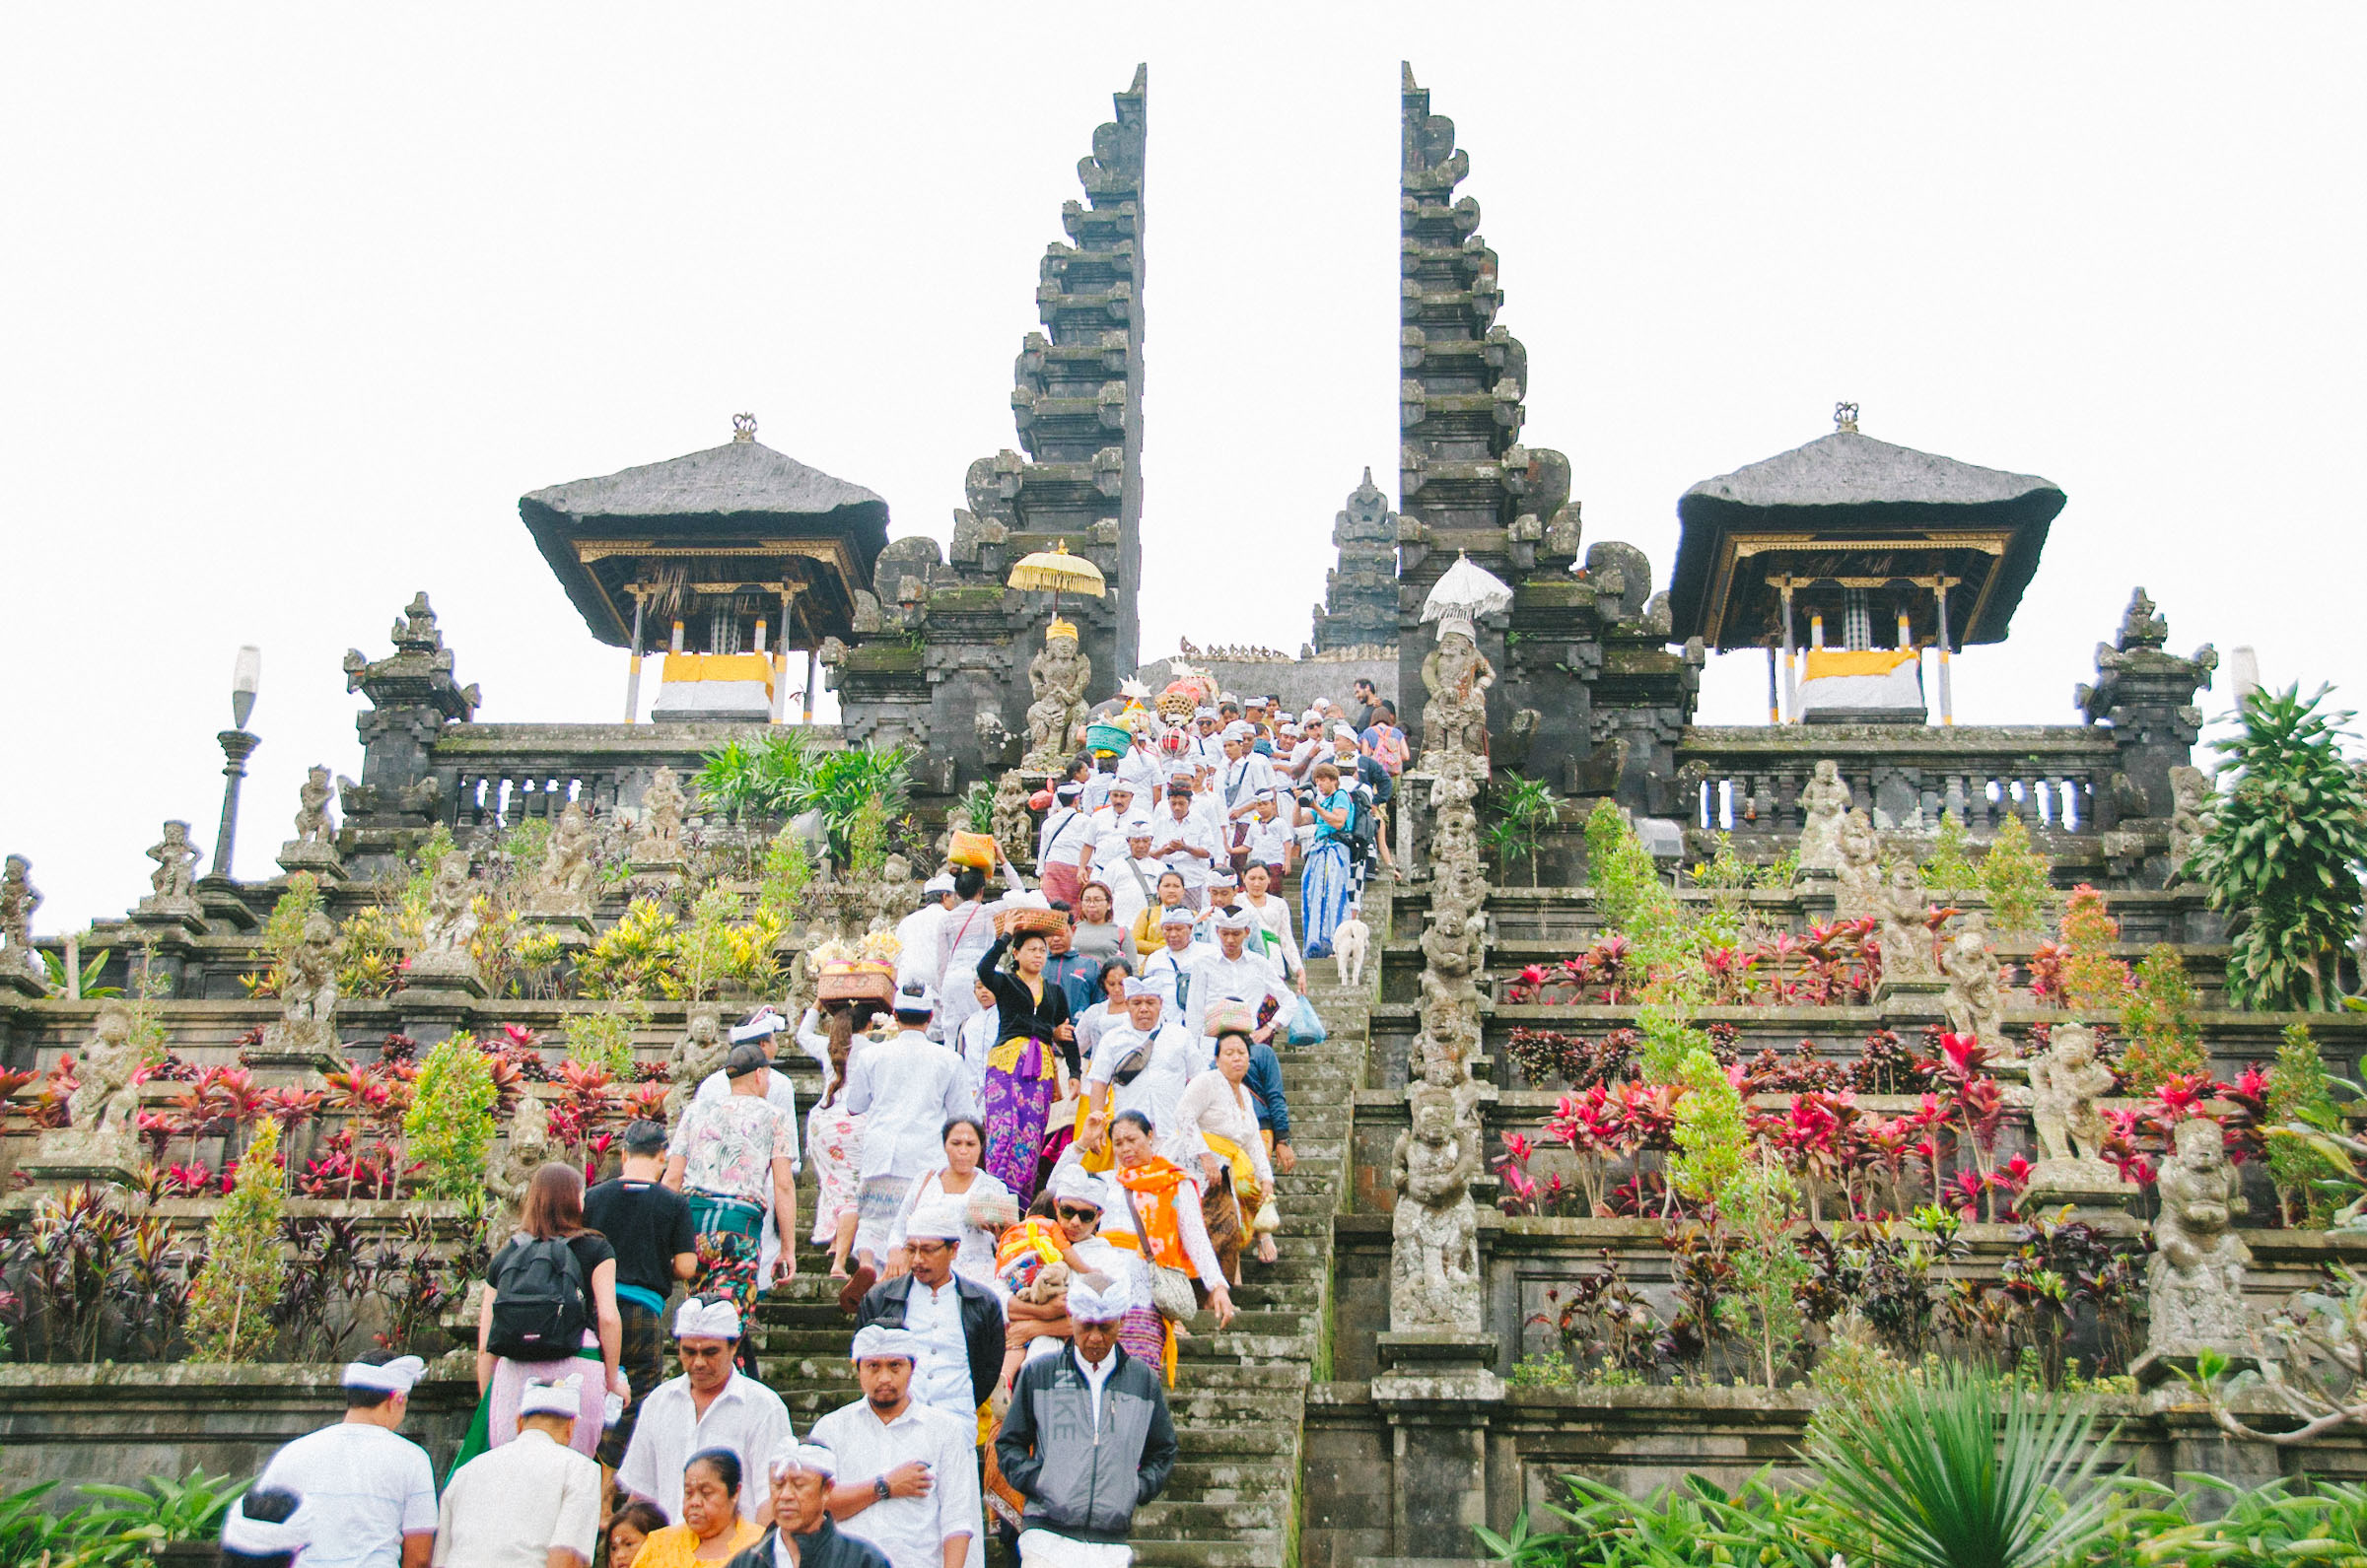 Balinese people making their way back down the stairs of Besakih Temple, known as Bali's 'Mother Temple' after attending the blessing ceremony. The complex is over 1.000 years old and is Bali's biggest and holiest temple.